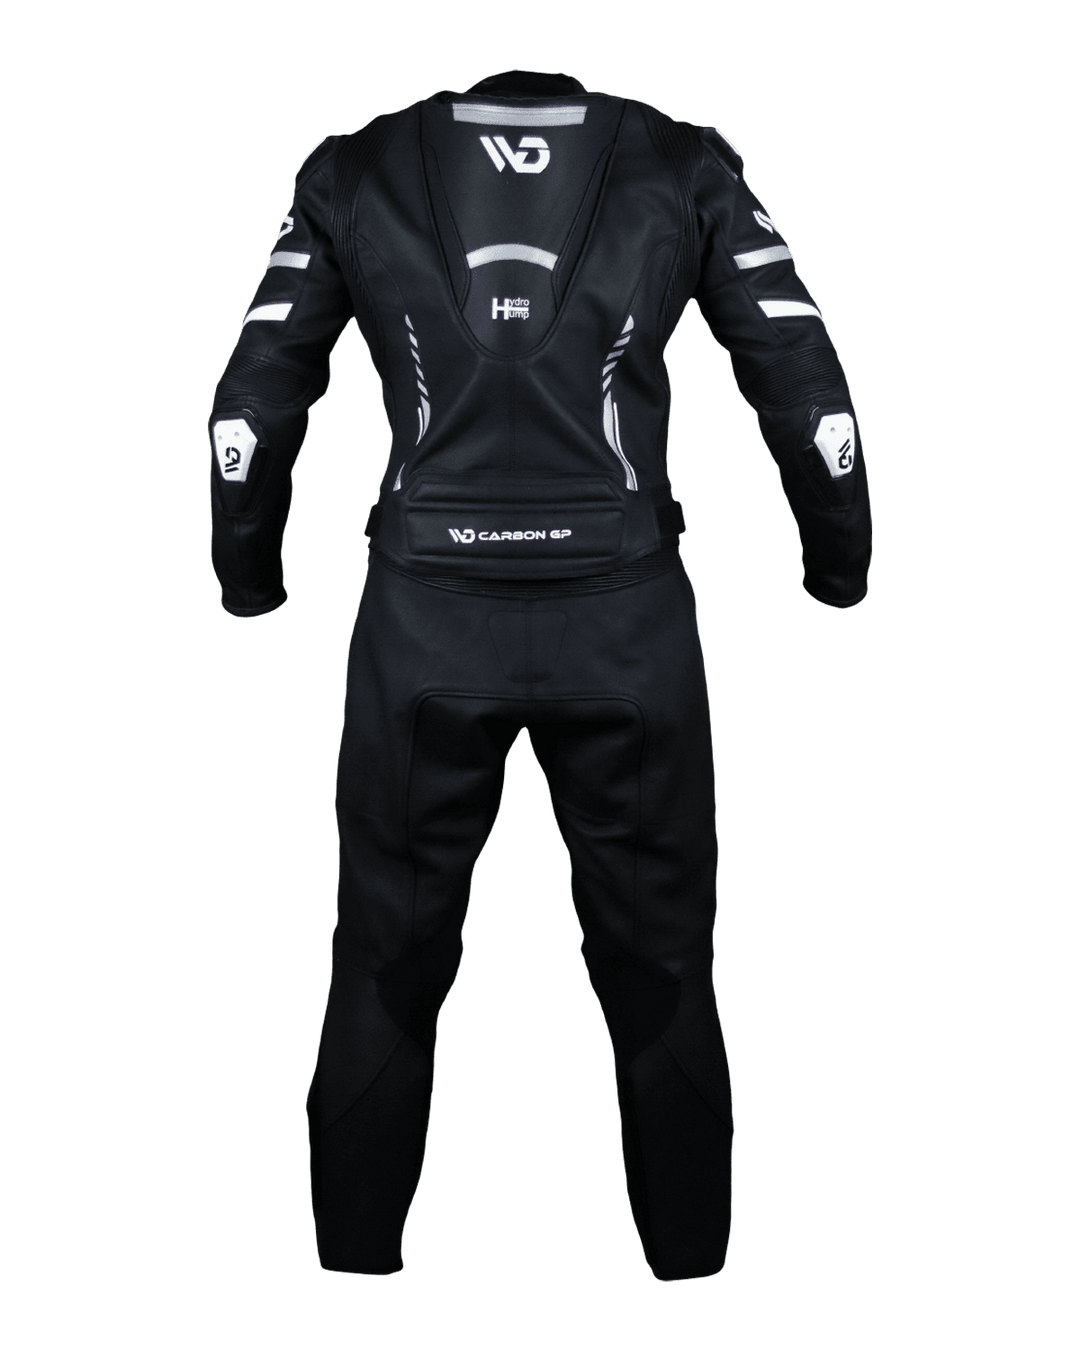 WD CARBON GP 2-PC - Grey - Motorcycle Leather Suit - Back View